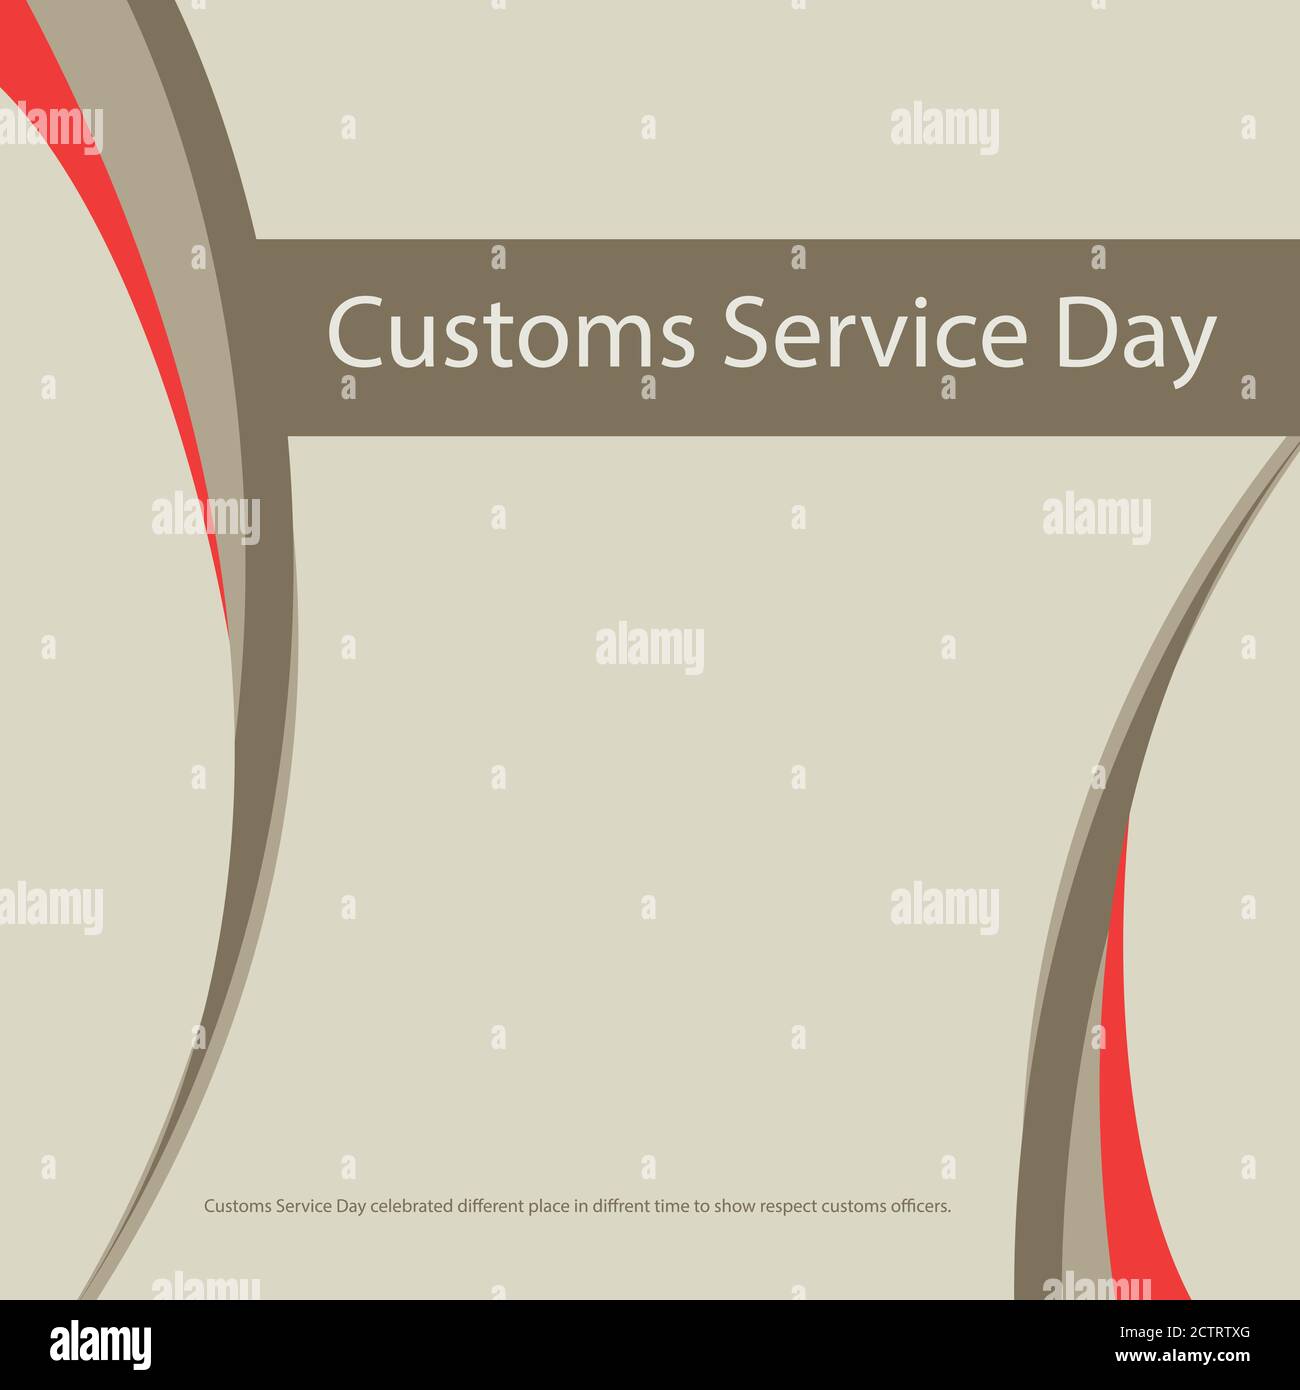 Customs Service Day celebrated different place in diffrent time to show respect customs officers. Stock Vector